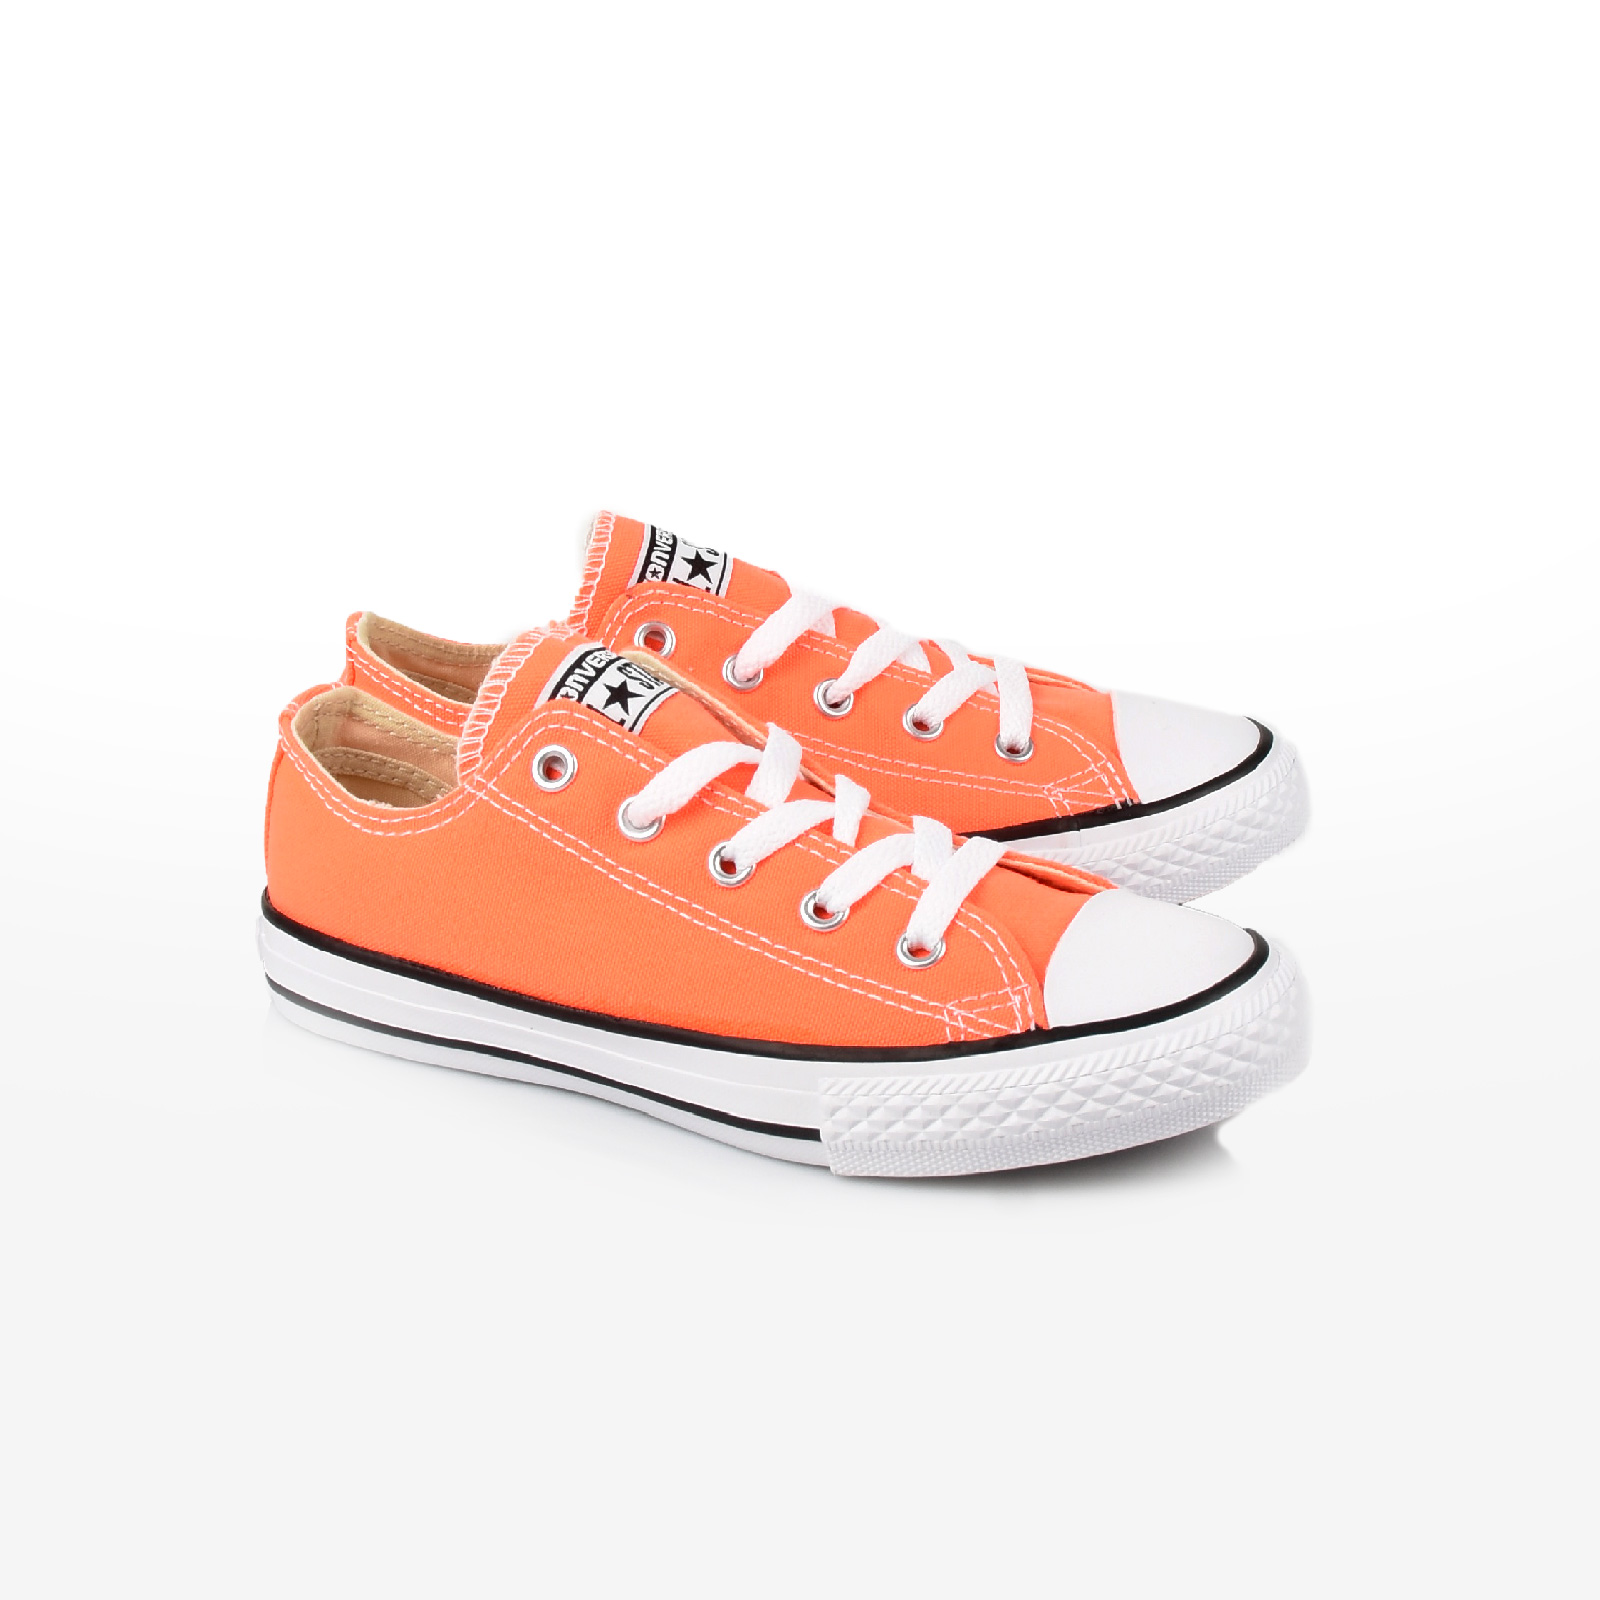 Converse - 355736C CHUCK TAYLOR ALL STAR - 00O6 Παιδικά > Παπούτσια > Sneaker > Παπούτσι Low Cut